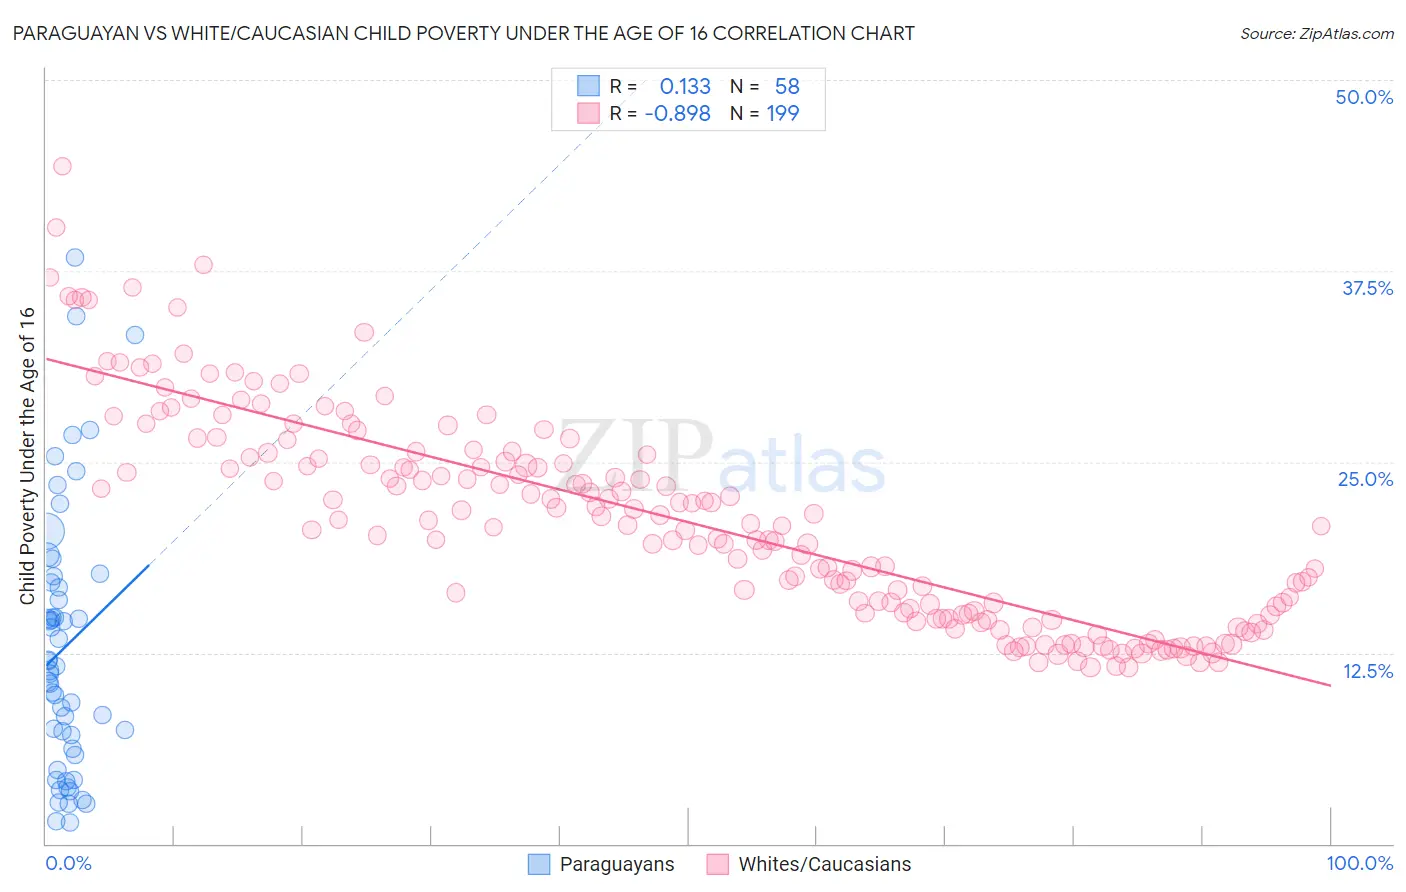 Paraguayan vs White/Caucasian Child Poverty Under the Age of 16